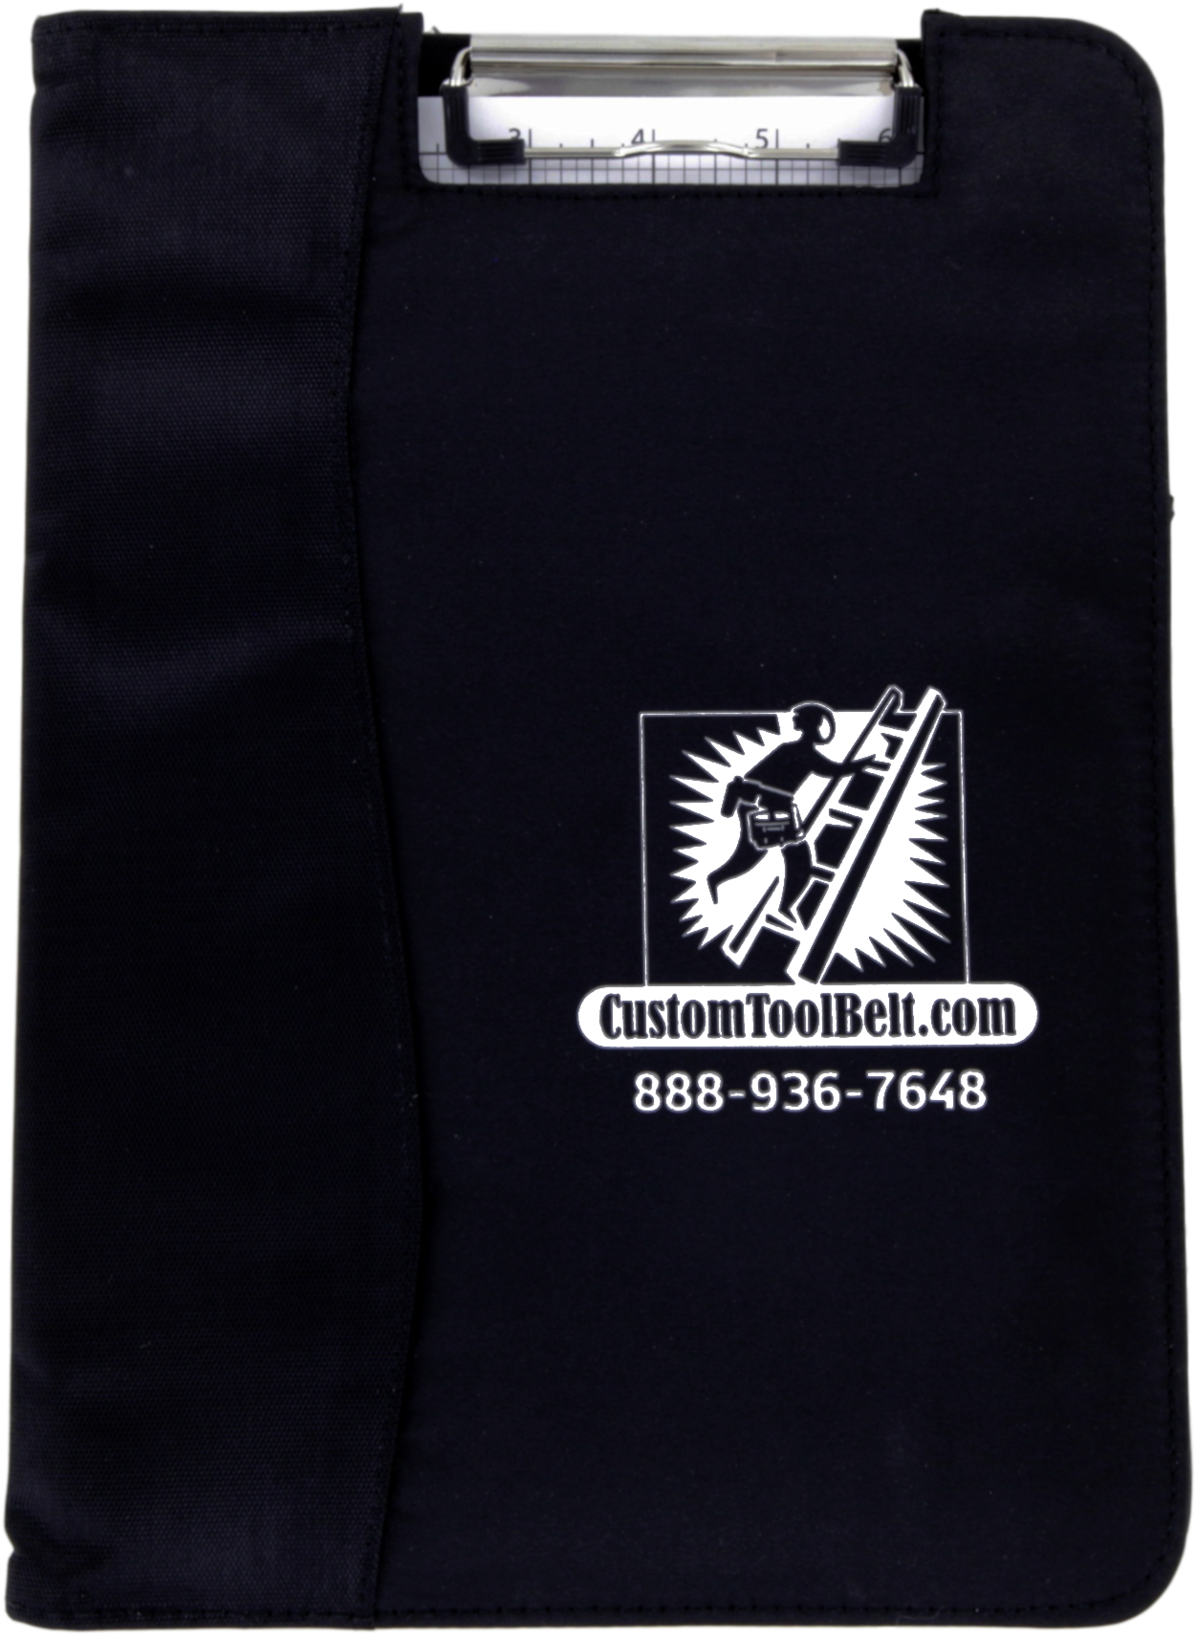 A Black Bag With A Logo On It